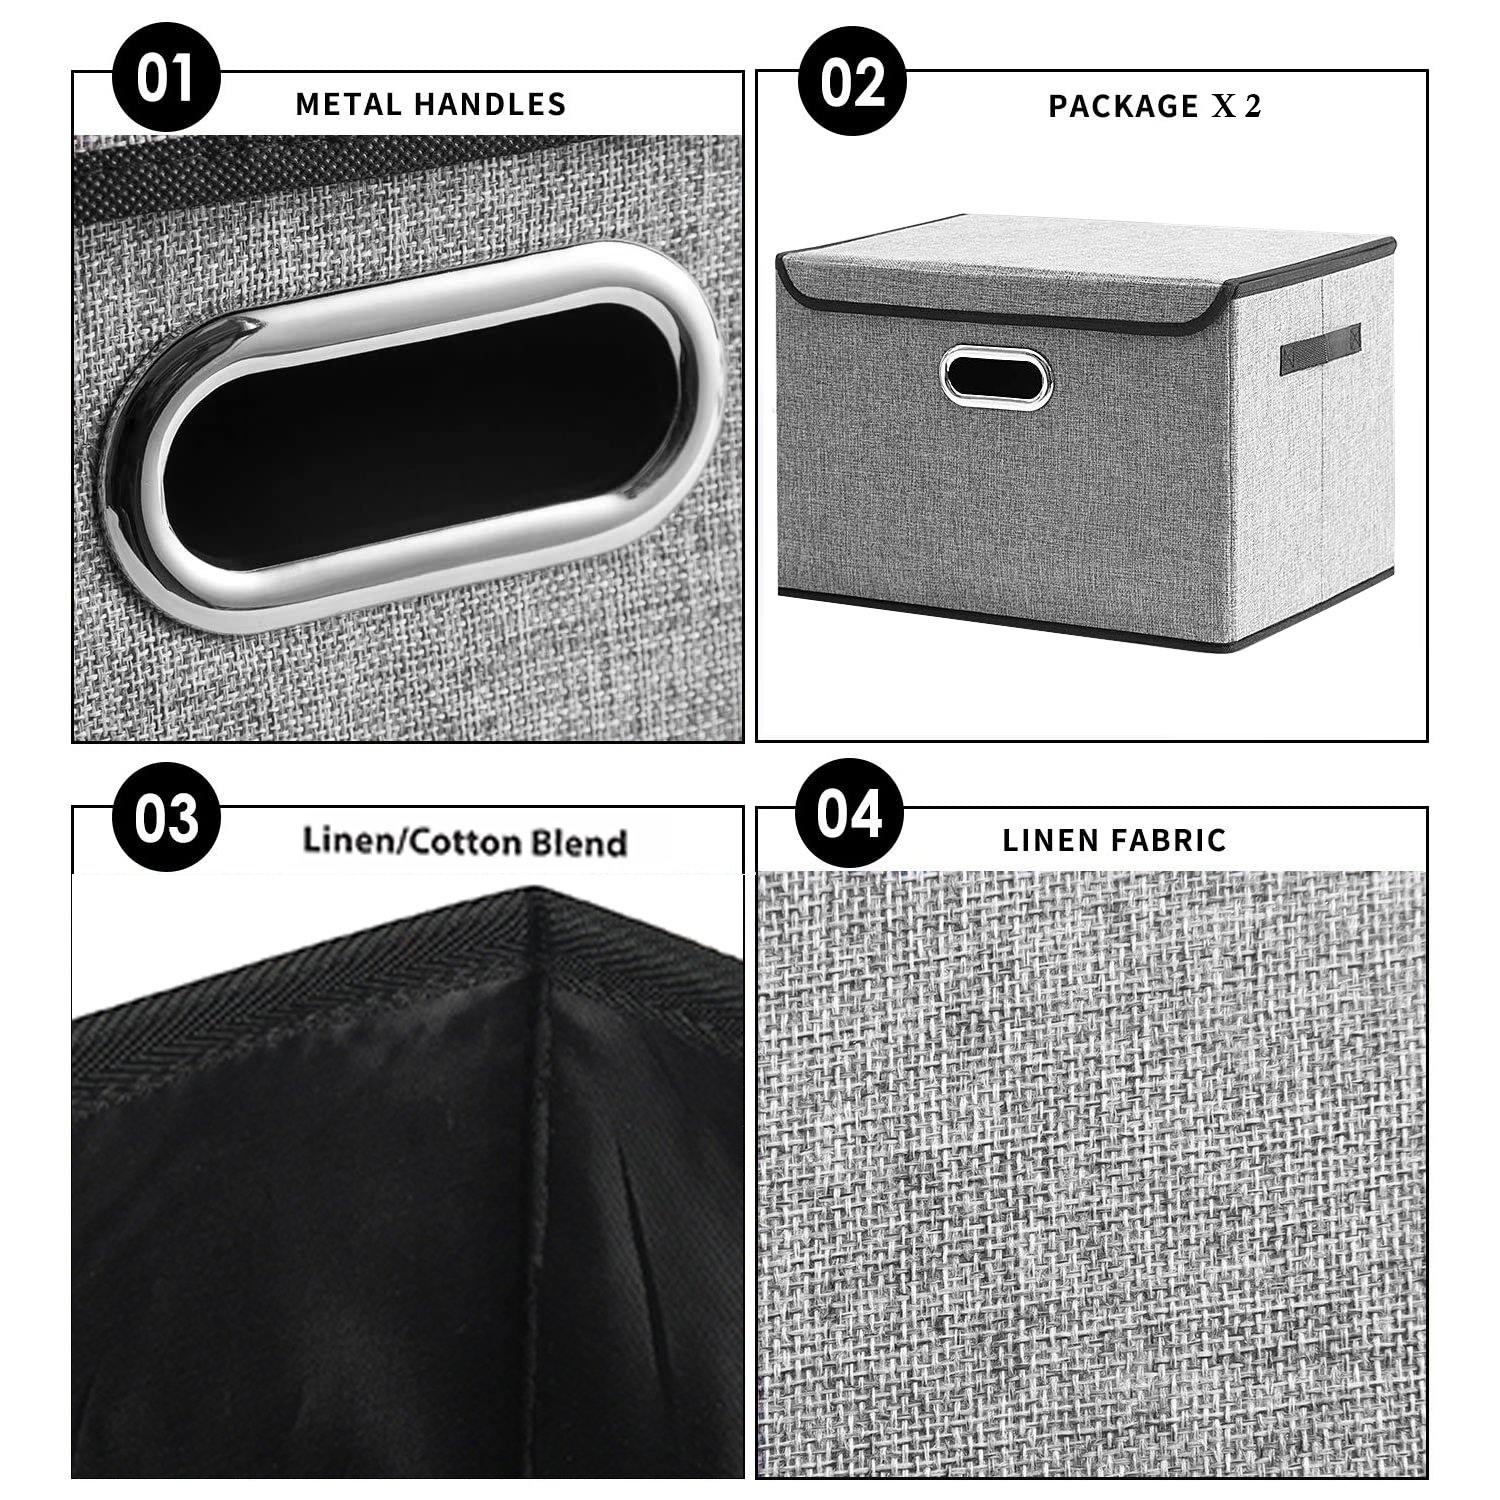 DOUBLE R BAGS Collapsible Storage Box with Lids Covers Large 2 Pack (Grey) - Double R Bags